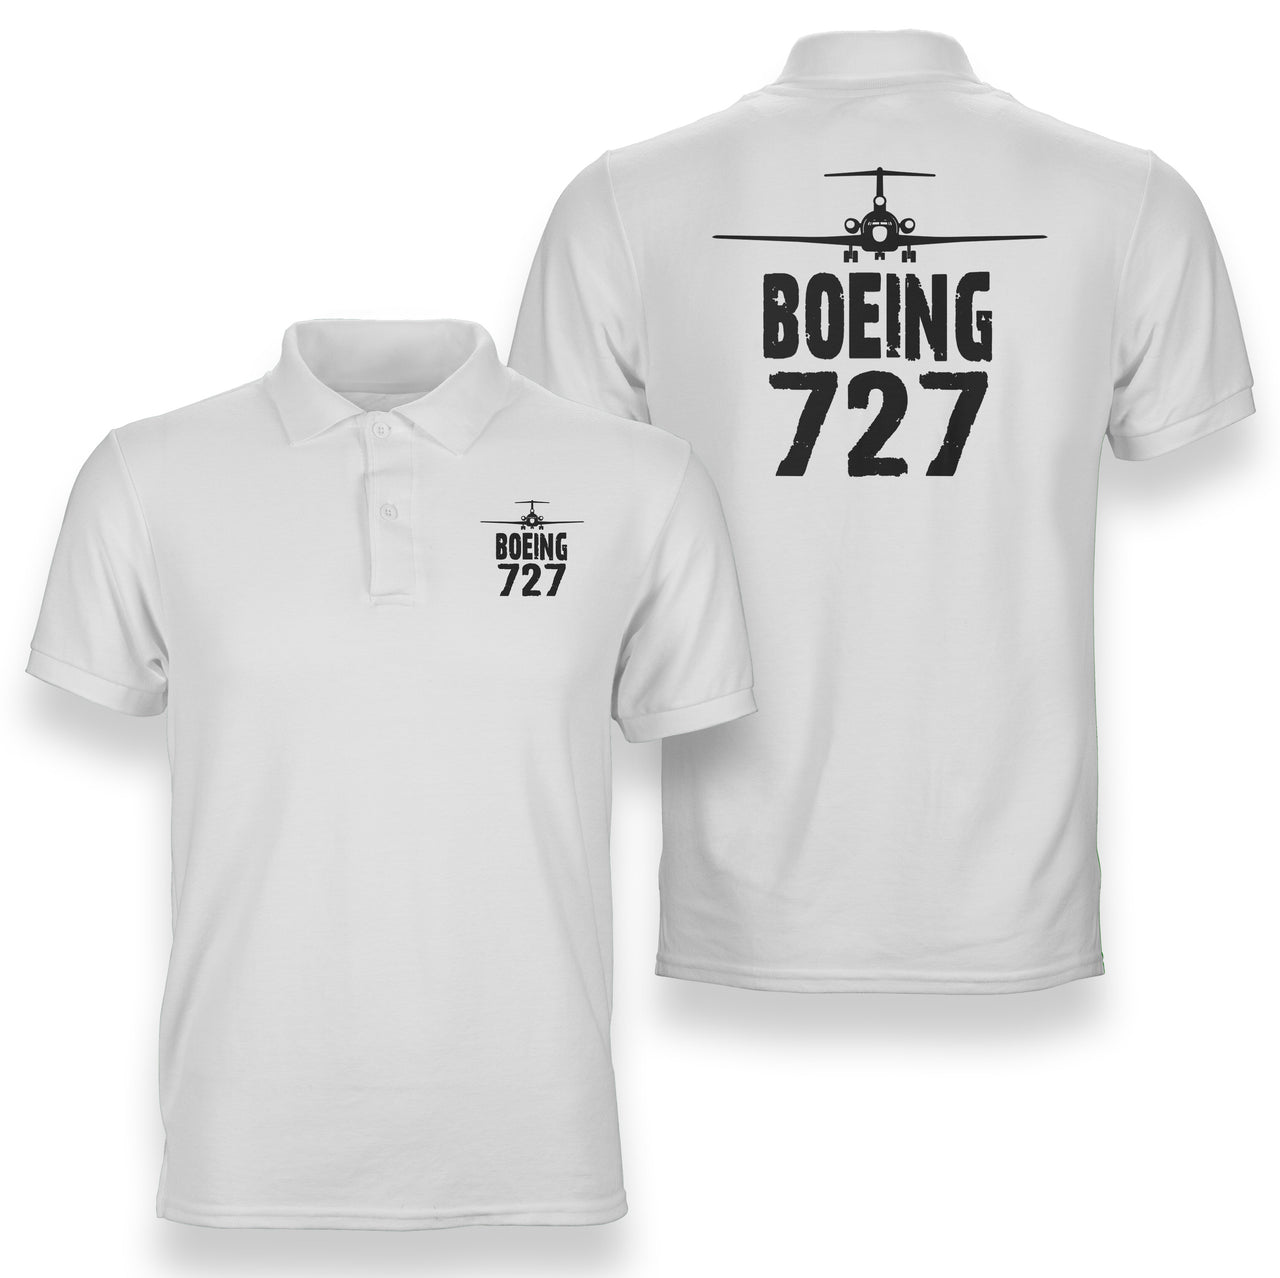 Boeing 727 & Plane Designed Double Side Polo T-Shirts